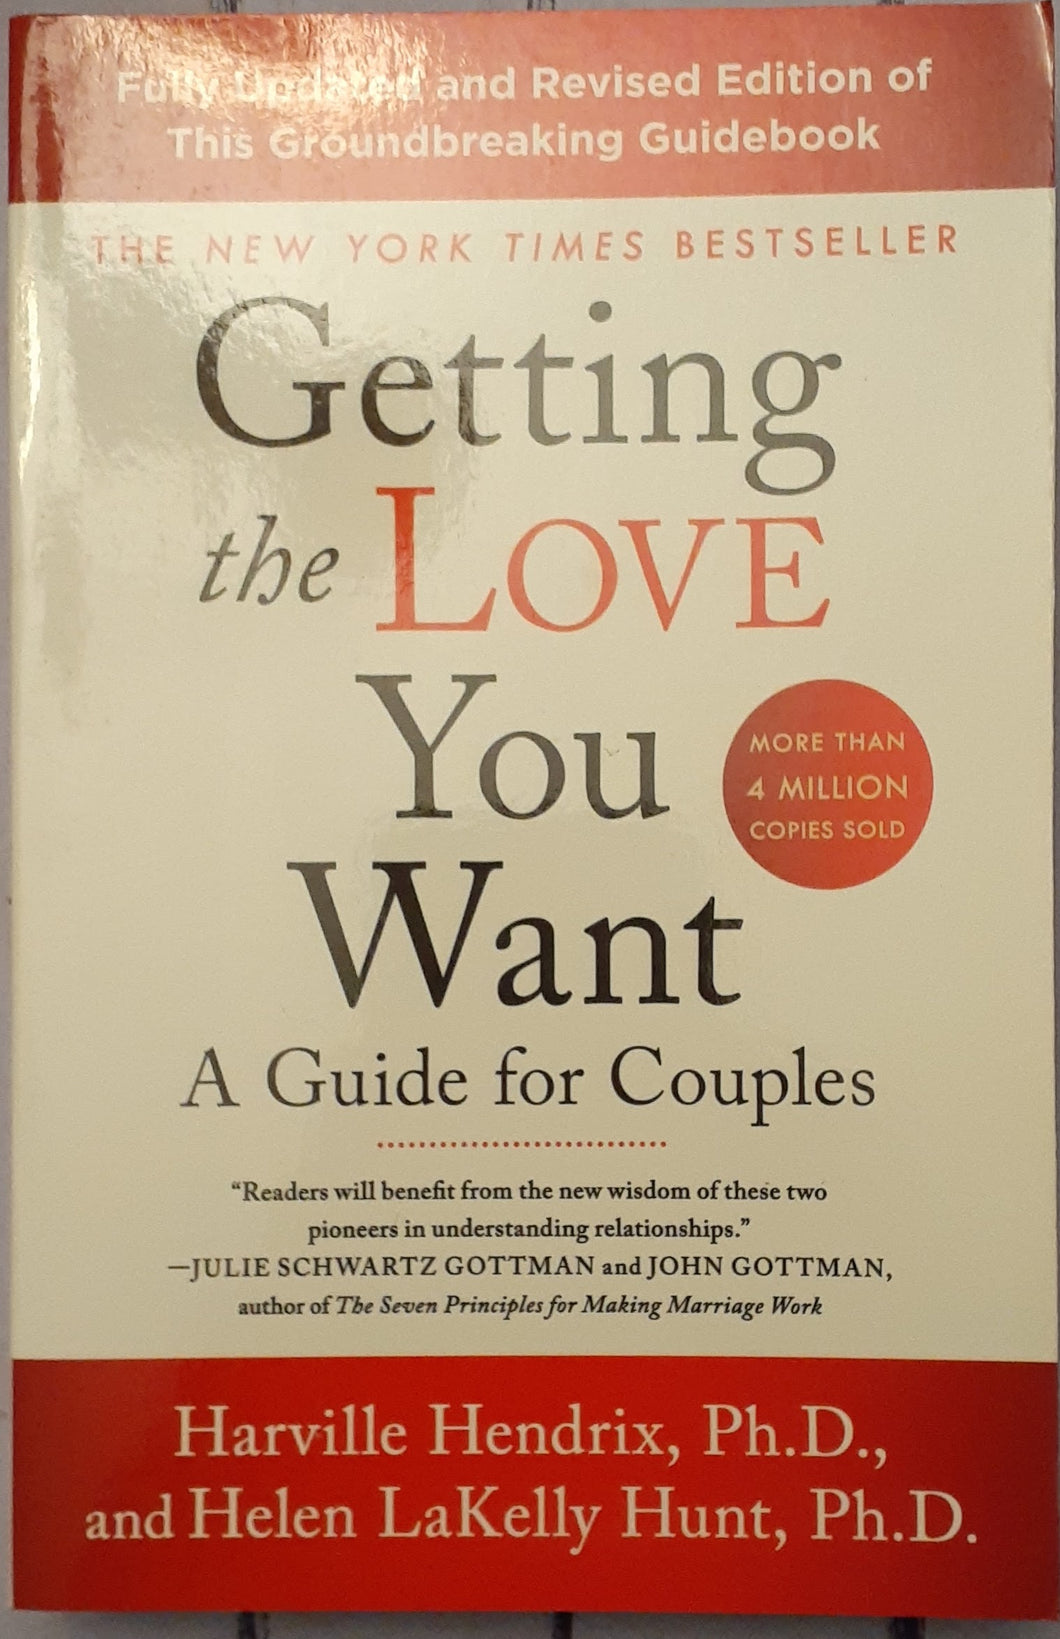 Getting the Love You Want - A Guide for Couples